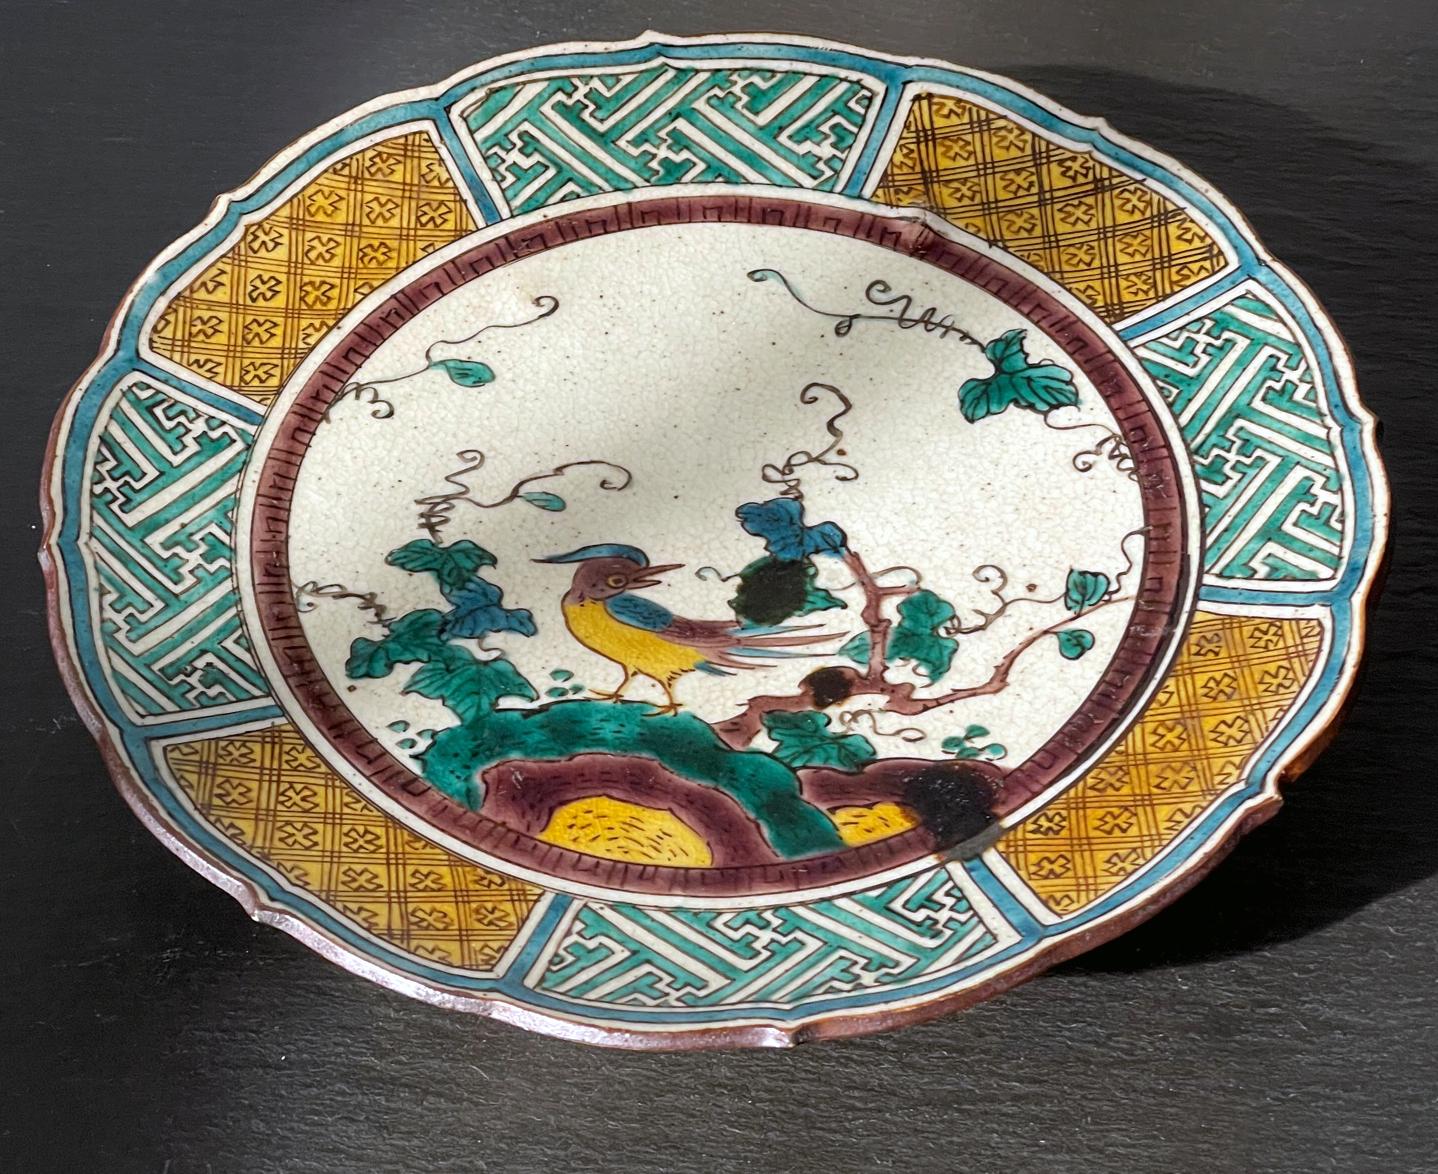 A Japanese glazed ceramic footed dish made in the Ko-Kutani type of Edo period but likely during Kutani revival in the 19th century Meiji Period. The dish with delicate foliaged rim is raised on a circular foot with cutout design. The piece is